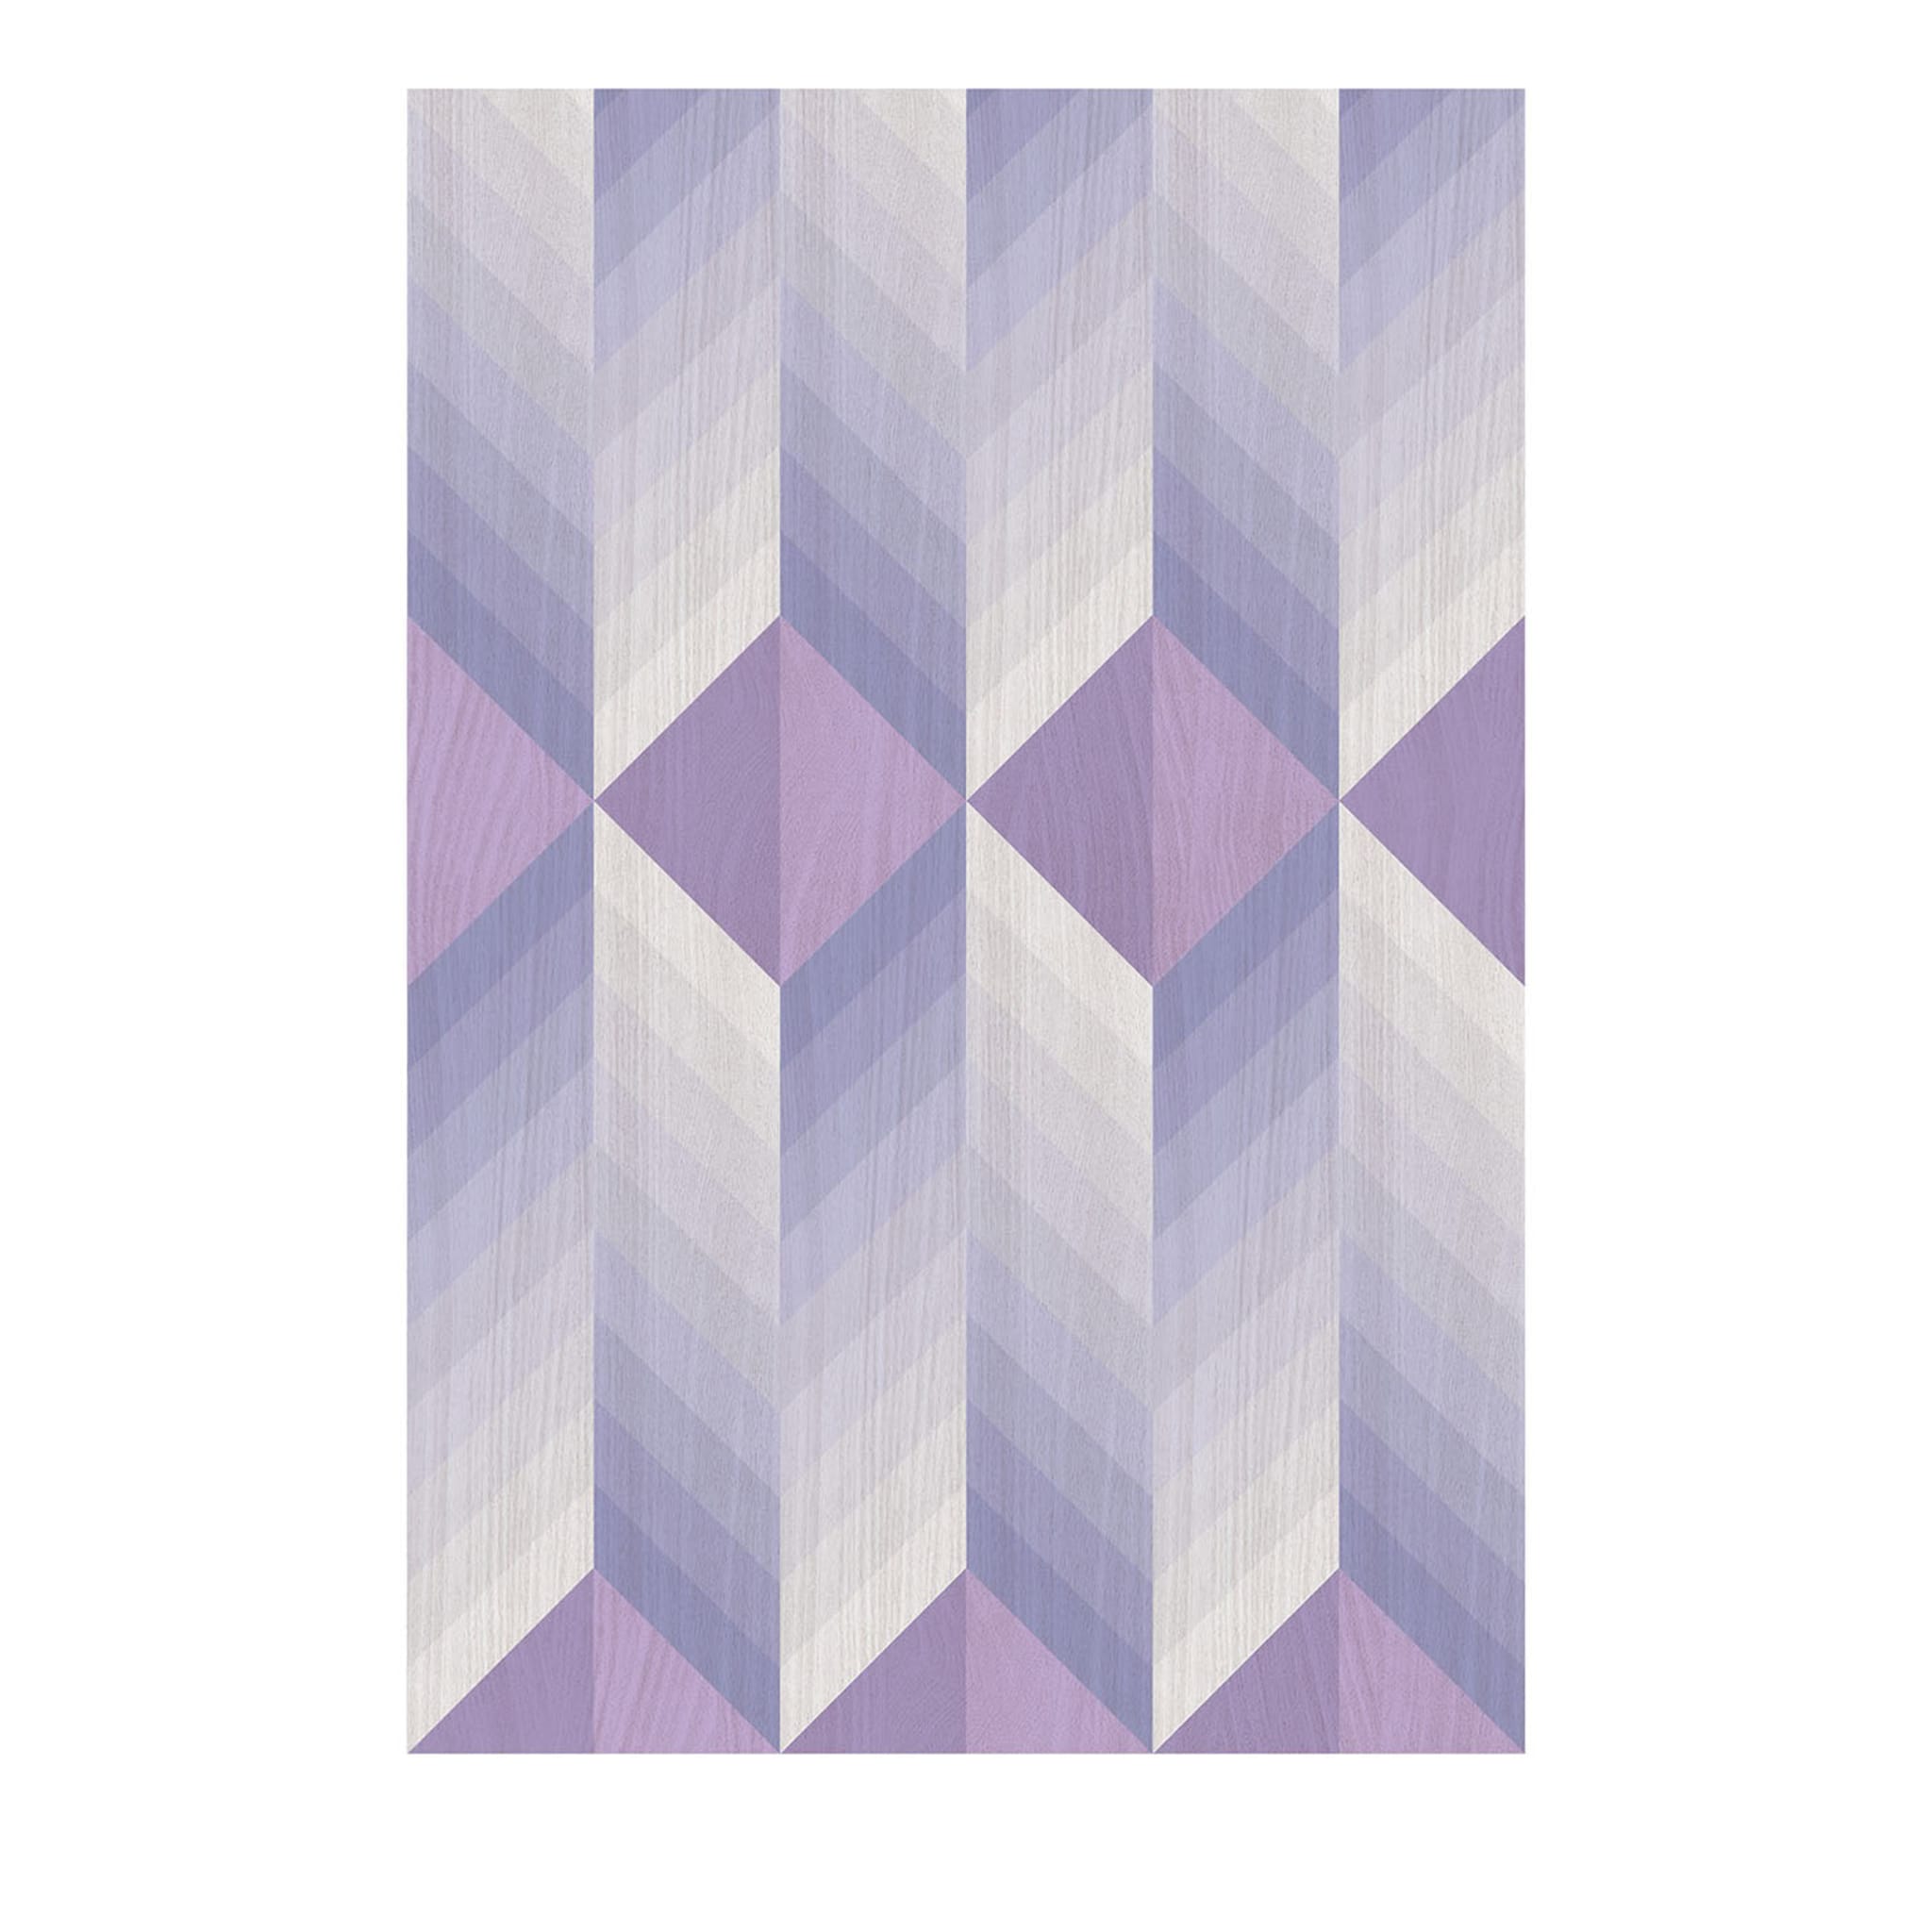 Geometry Triangles Violet Wallpaper - Main view